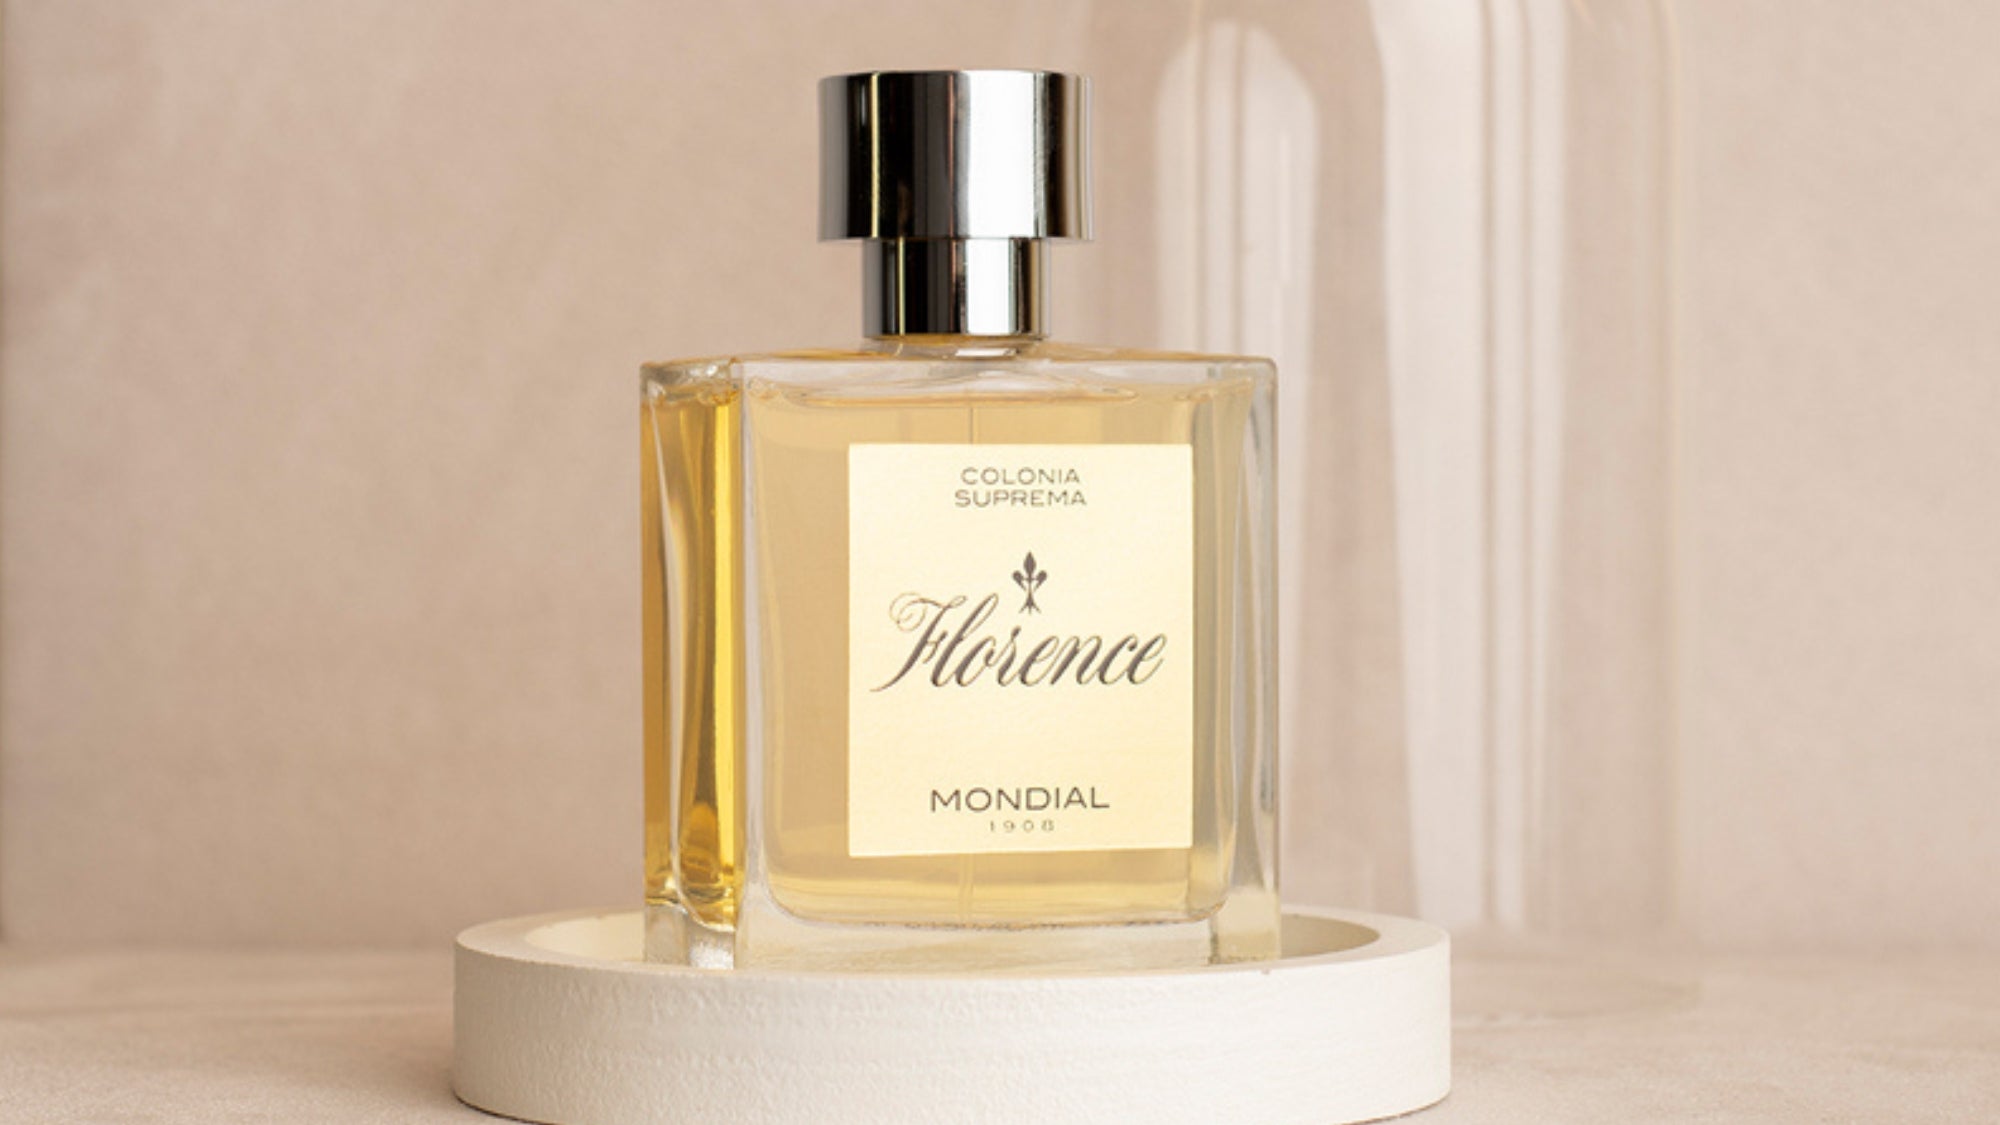 The 'Florence' Collection